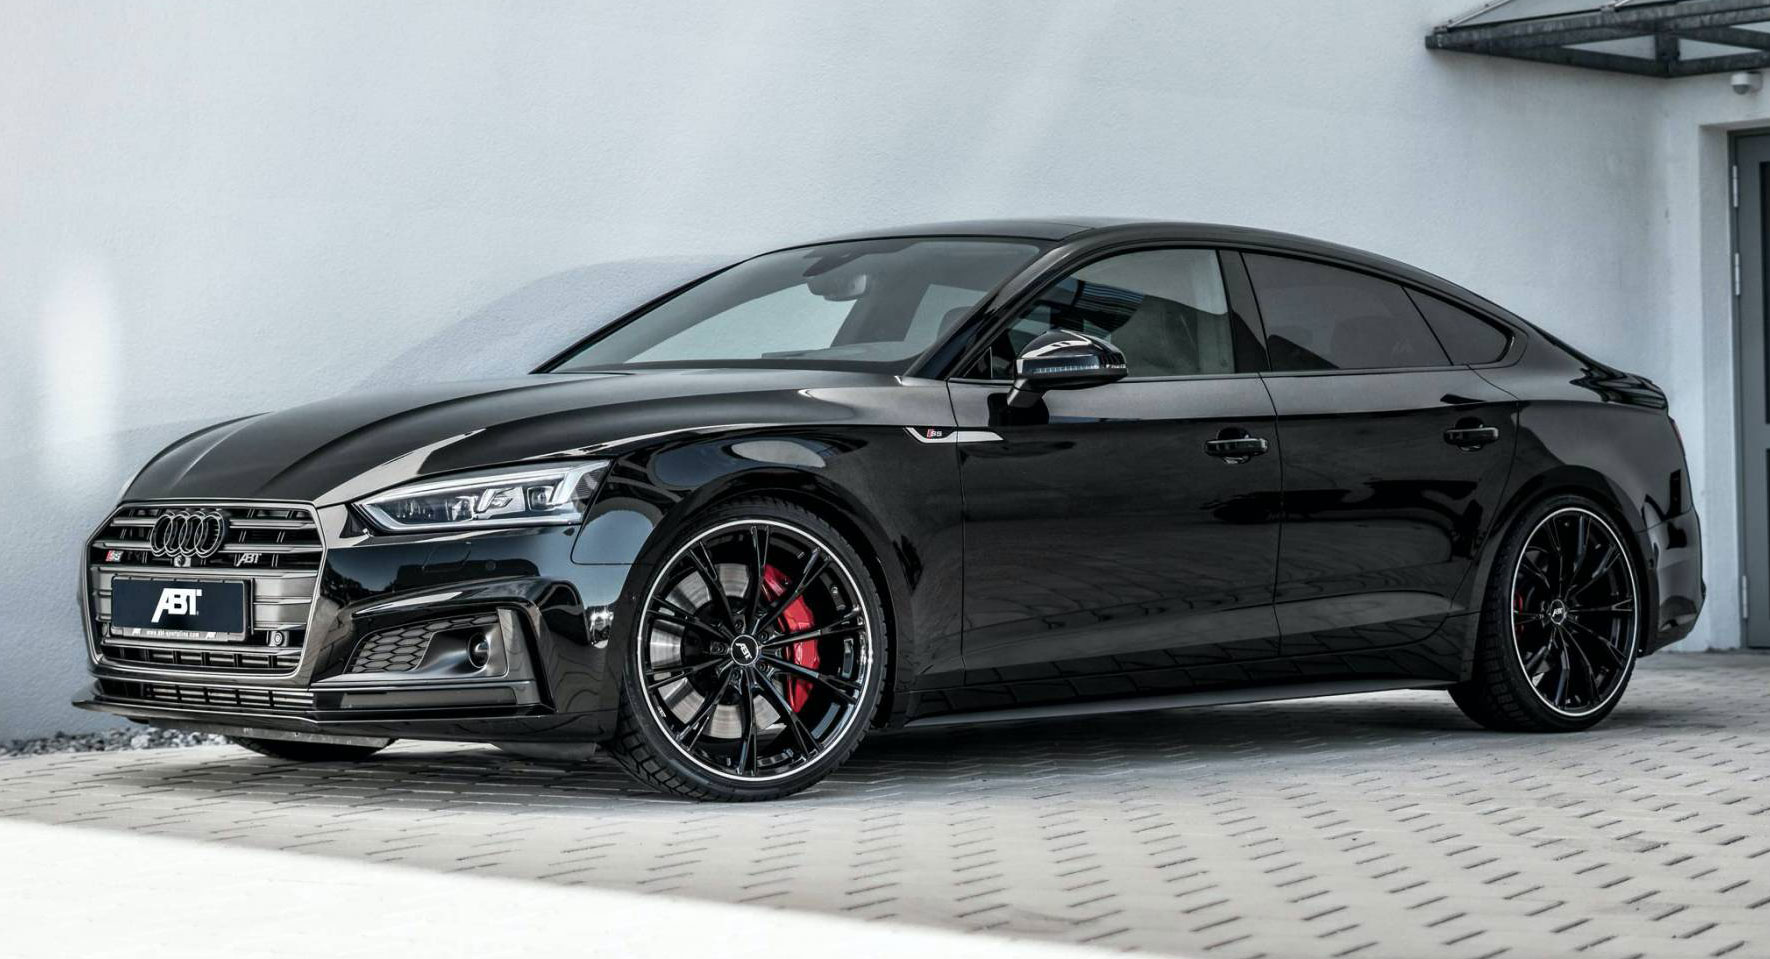 ABT Gives Europe's 2020 Audi S5 Sportback A Diesel Boost To 379 HP